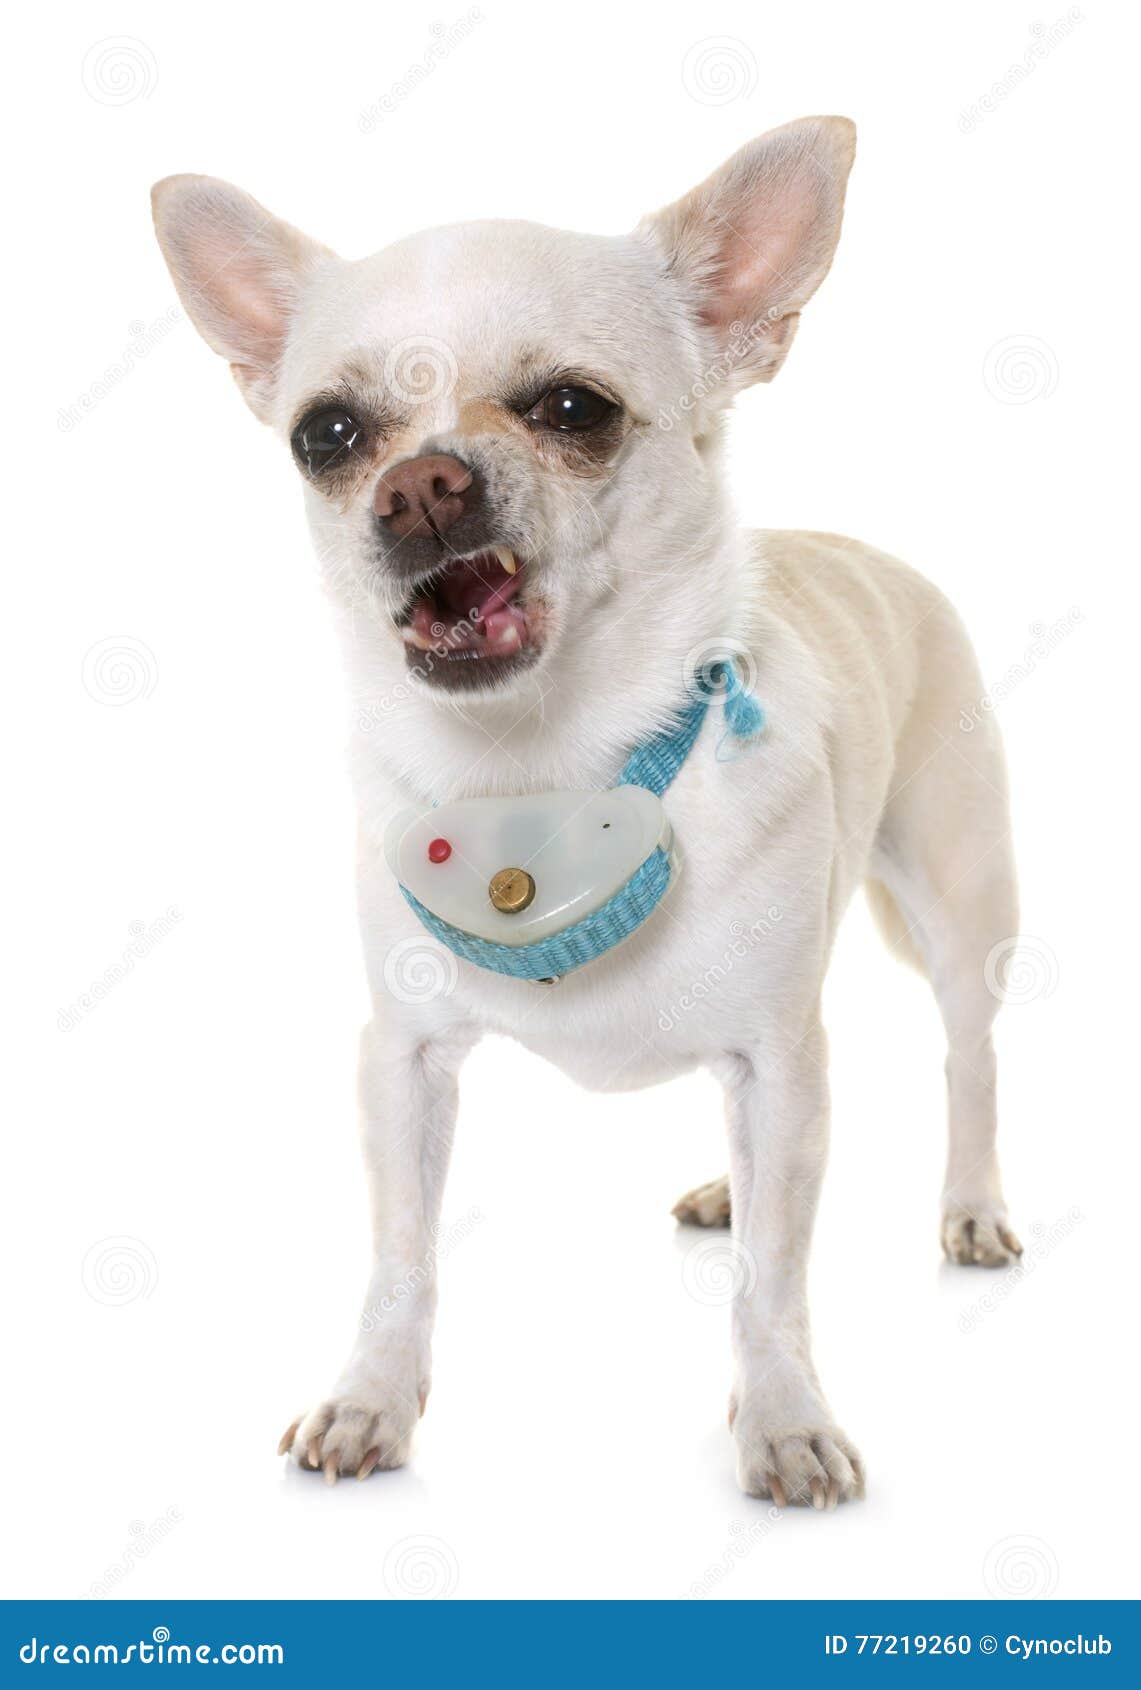 Chihuahua and shock collar stock photo. Image of equipment